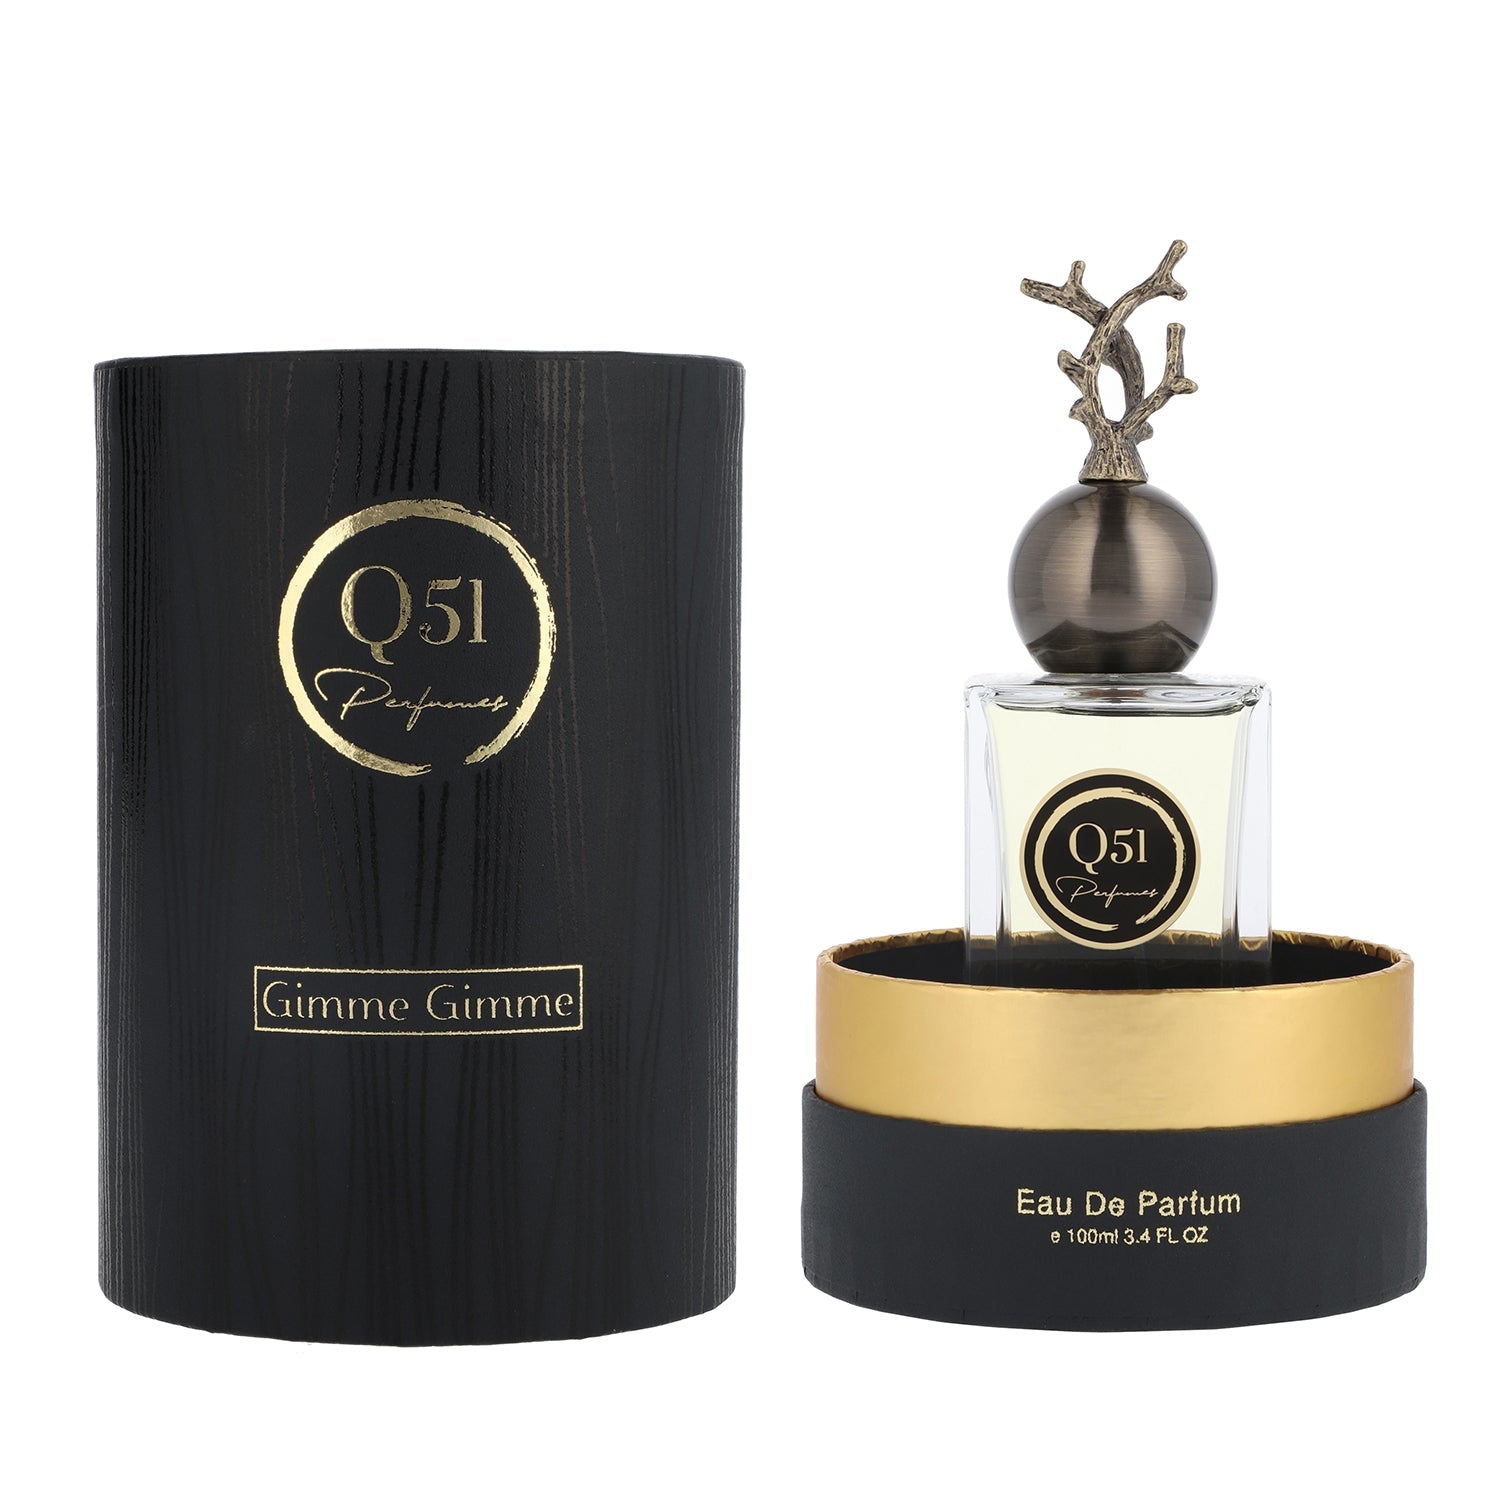 Gimme Gimme EDP 100 ml from  Q51 Perfumes